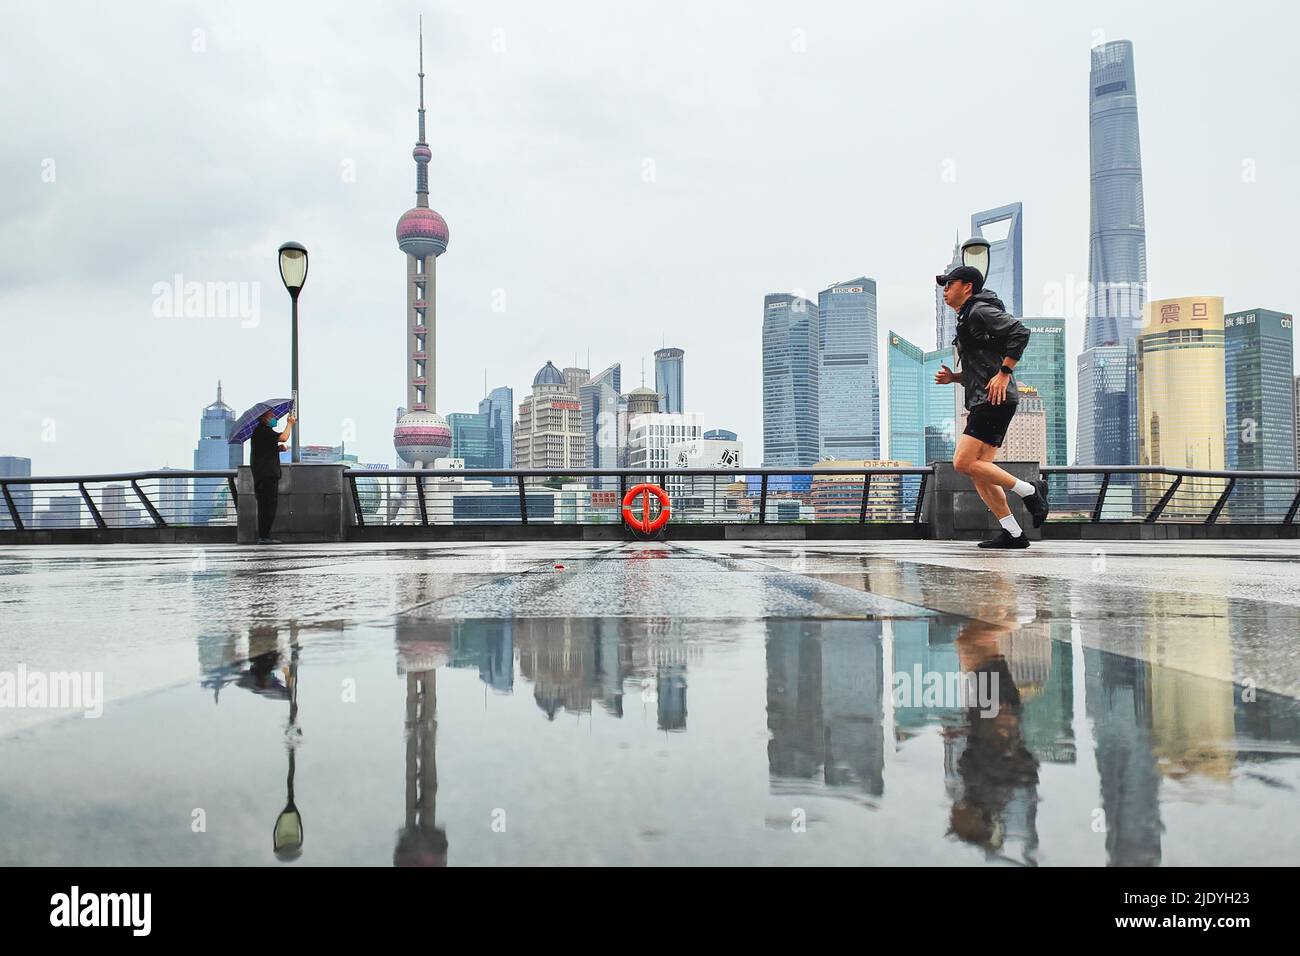 SHANGHAI, CHINA - JUNE 24, 2022 - A tourist holds an umbrella as he passes the Bund in the rain on June 24, 2022 in Shanghai, China. Stock Photo